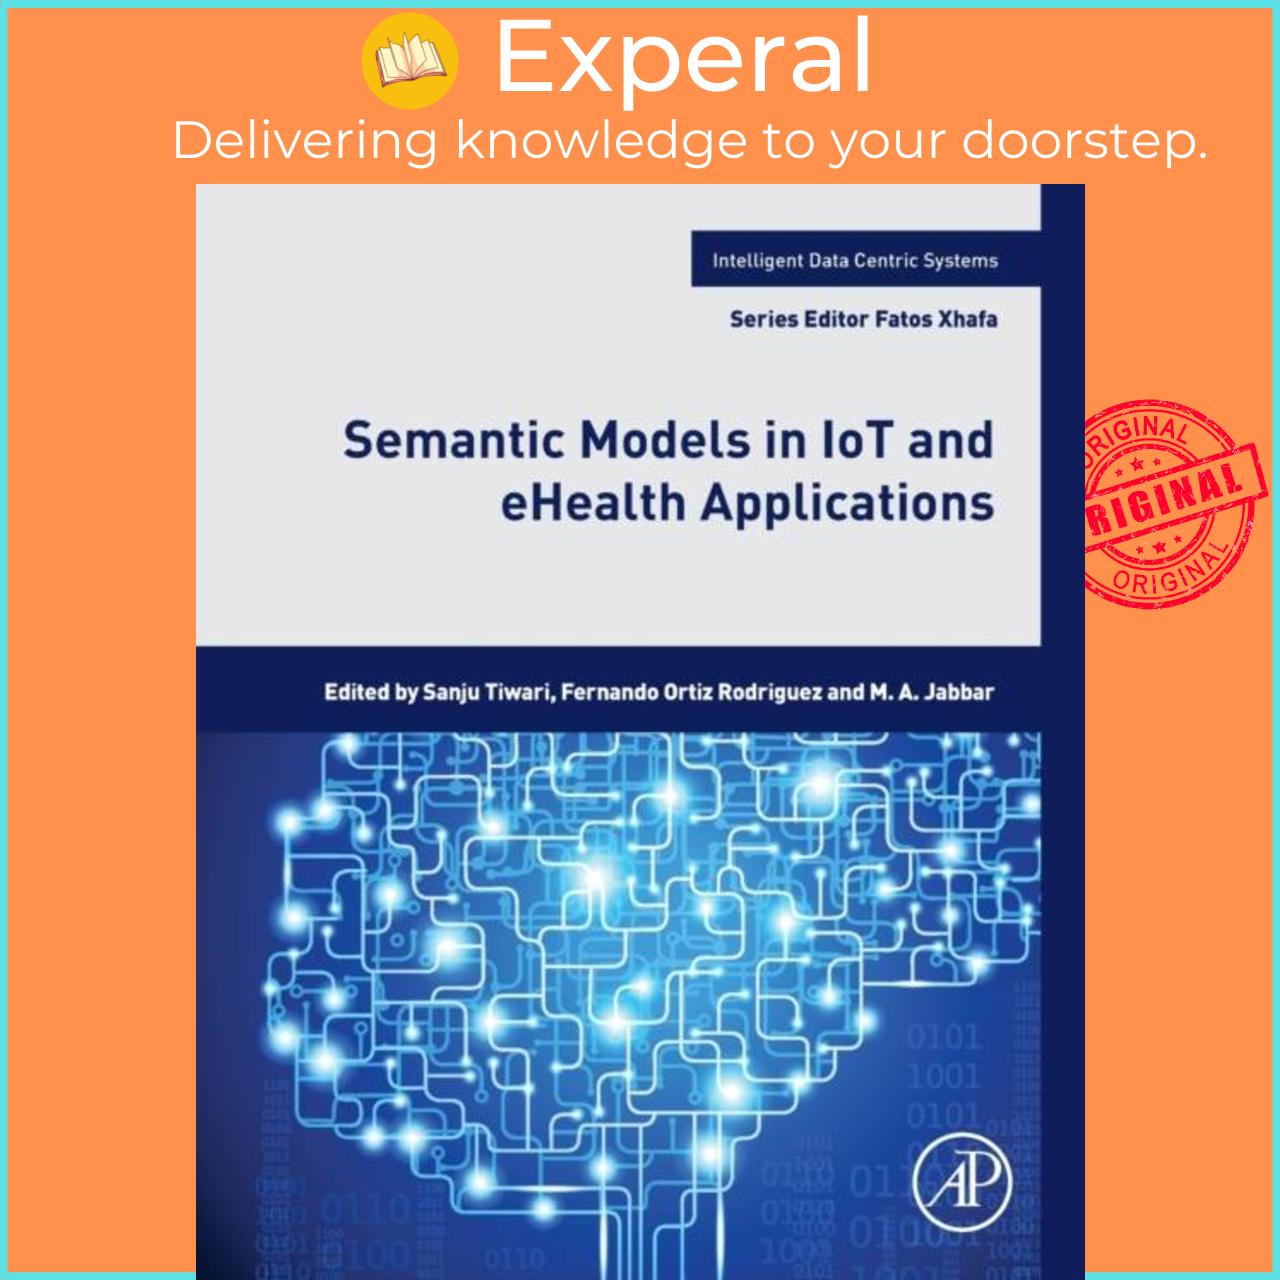 Sách - Semantic Models in IoT and eHealth Applications by M.A. Jabbar (UK edition, paperback)